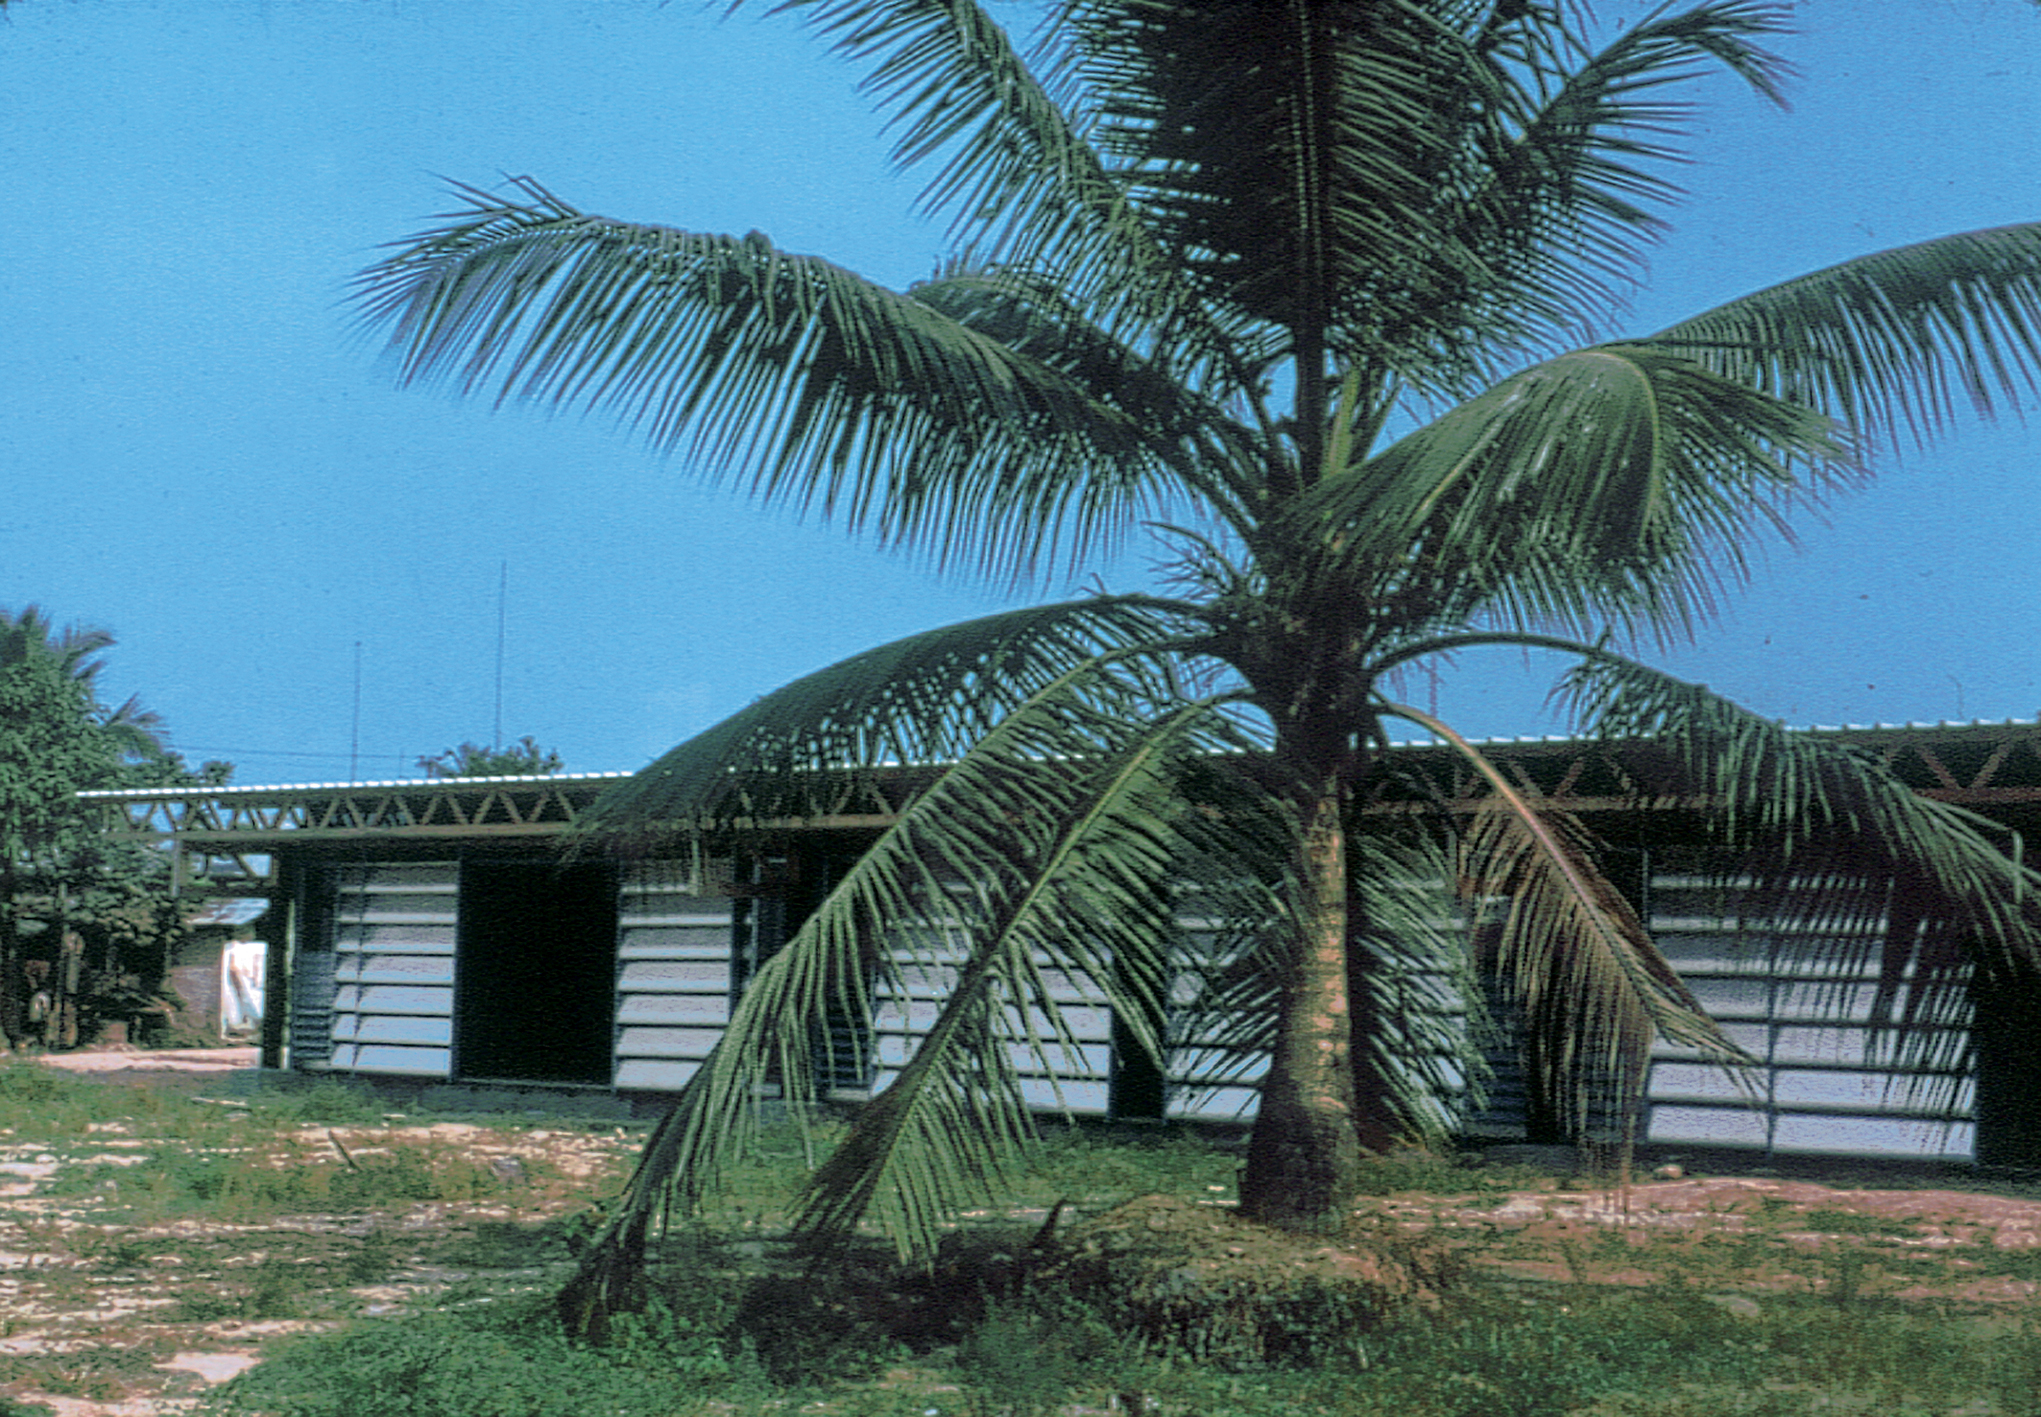 Mass-produced schools in Cameroon and teacher accommodations (Atelier LWD Lagneau, Weill, Dimitrijevic, architects, 1964). Sun shutter facades designed by Jean Prouvé.